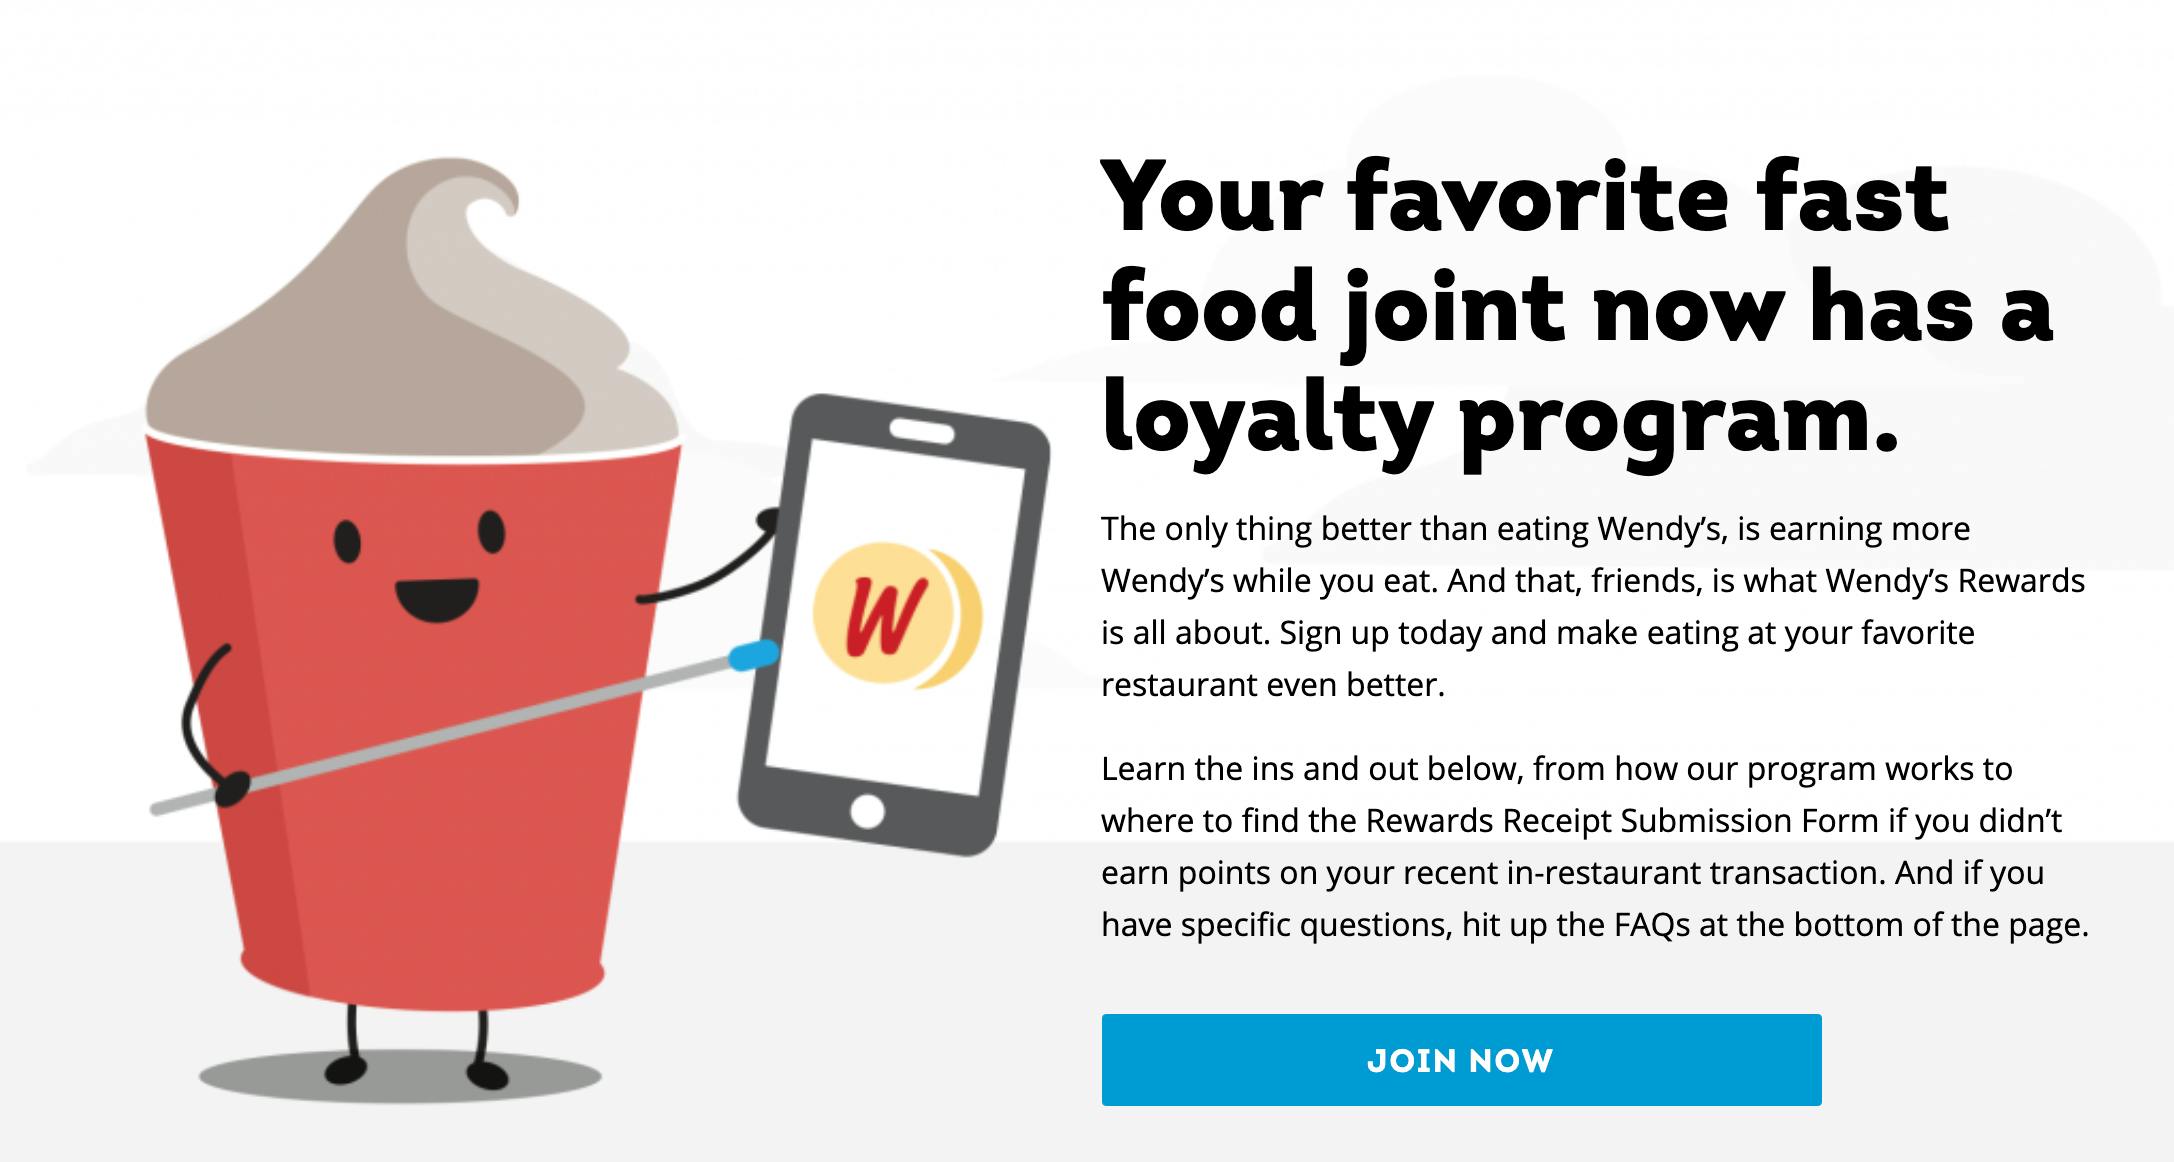 A screenshot from the Wendy's website advertising their loyalty program which reads, "Your favorite fast food joint now has a loyalty program. The only thing better than eating Wendy's is earning more Wendy's while you eat. And that, friends, is what Wendy's Rewards is all about. Sign up today and make eating at your favorite restaurant even better. Learn the ins and out below, from how our program works to where to find the Rewards Receipt Submission Form if you didn't earn points on your recent in-restaurant transaction. And if you have specific questions, hit up the FAQs at the bottom of the page. Join Now!